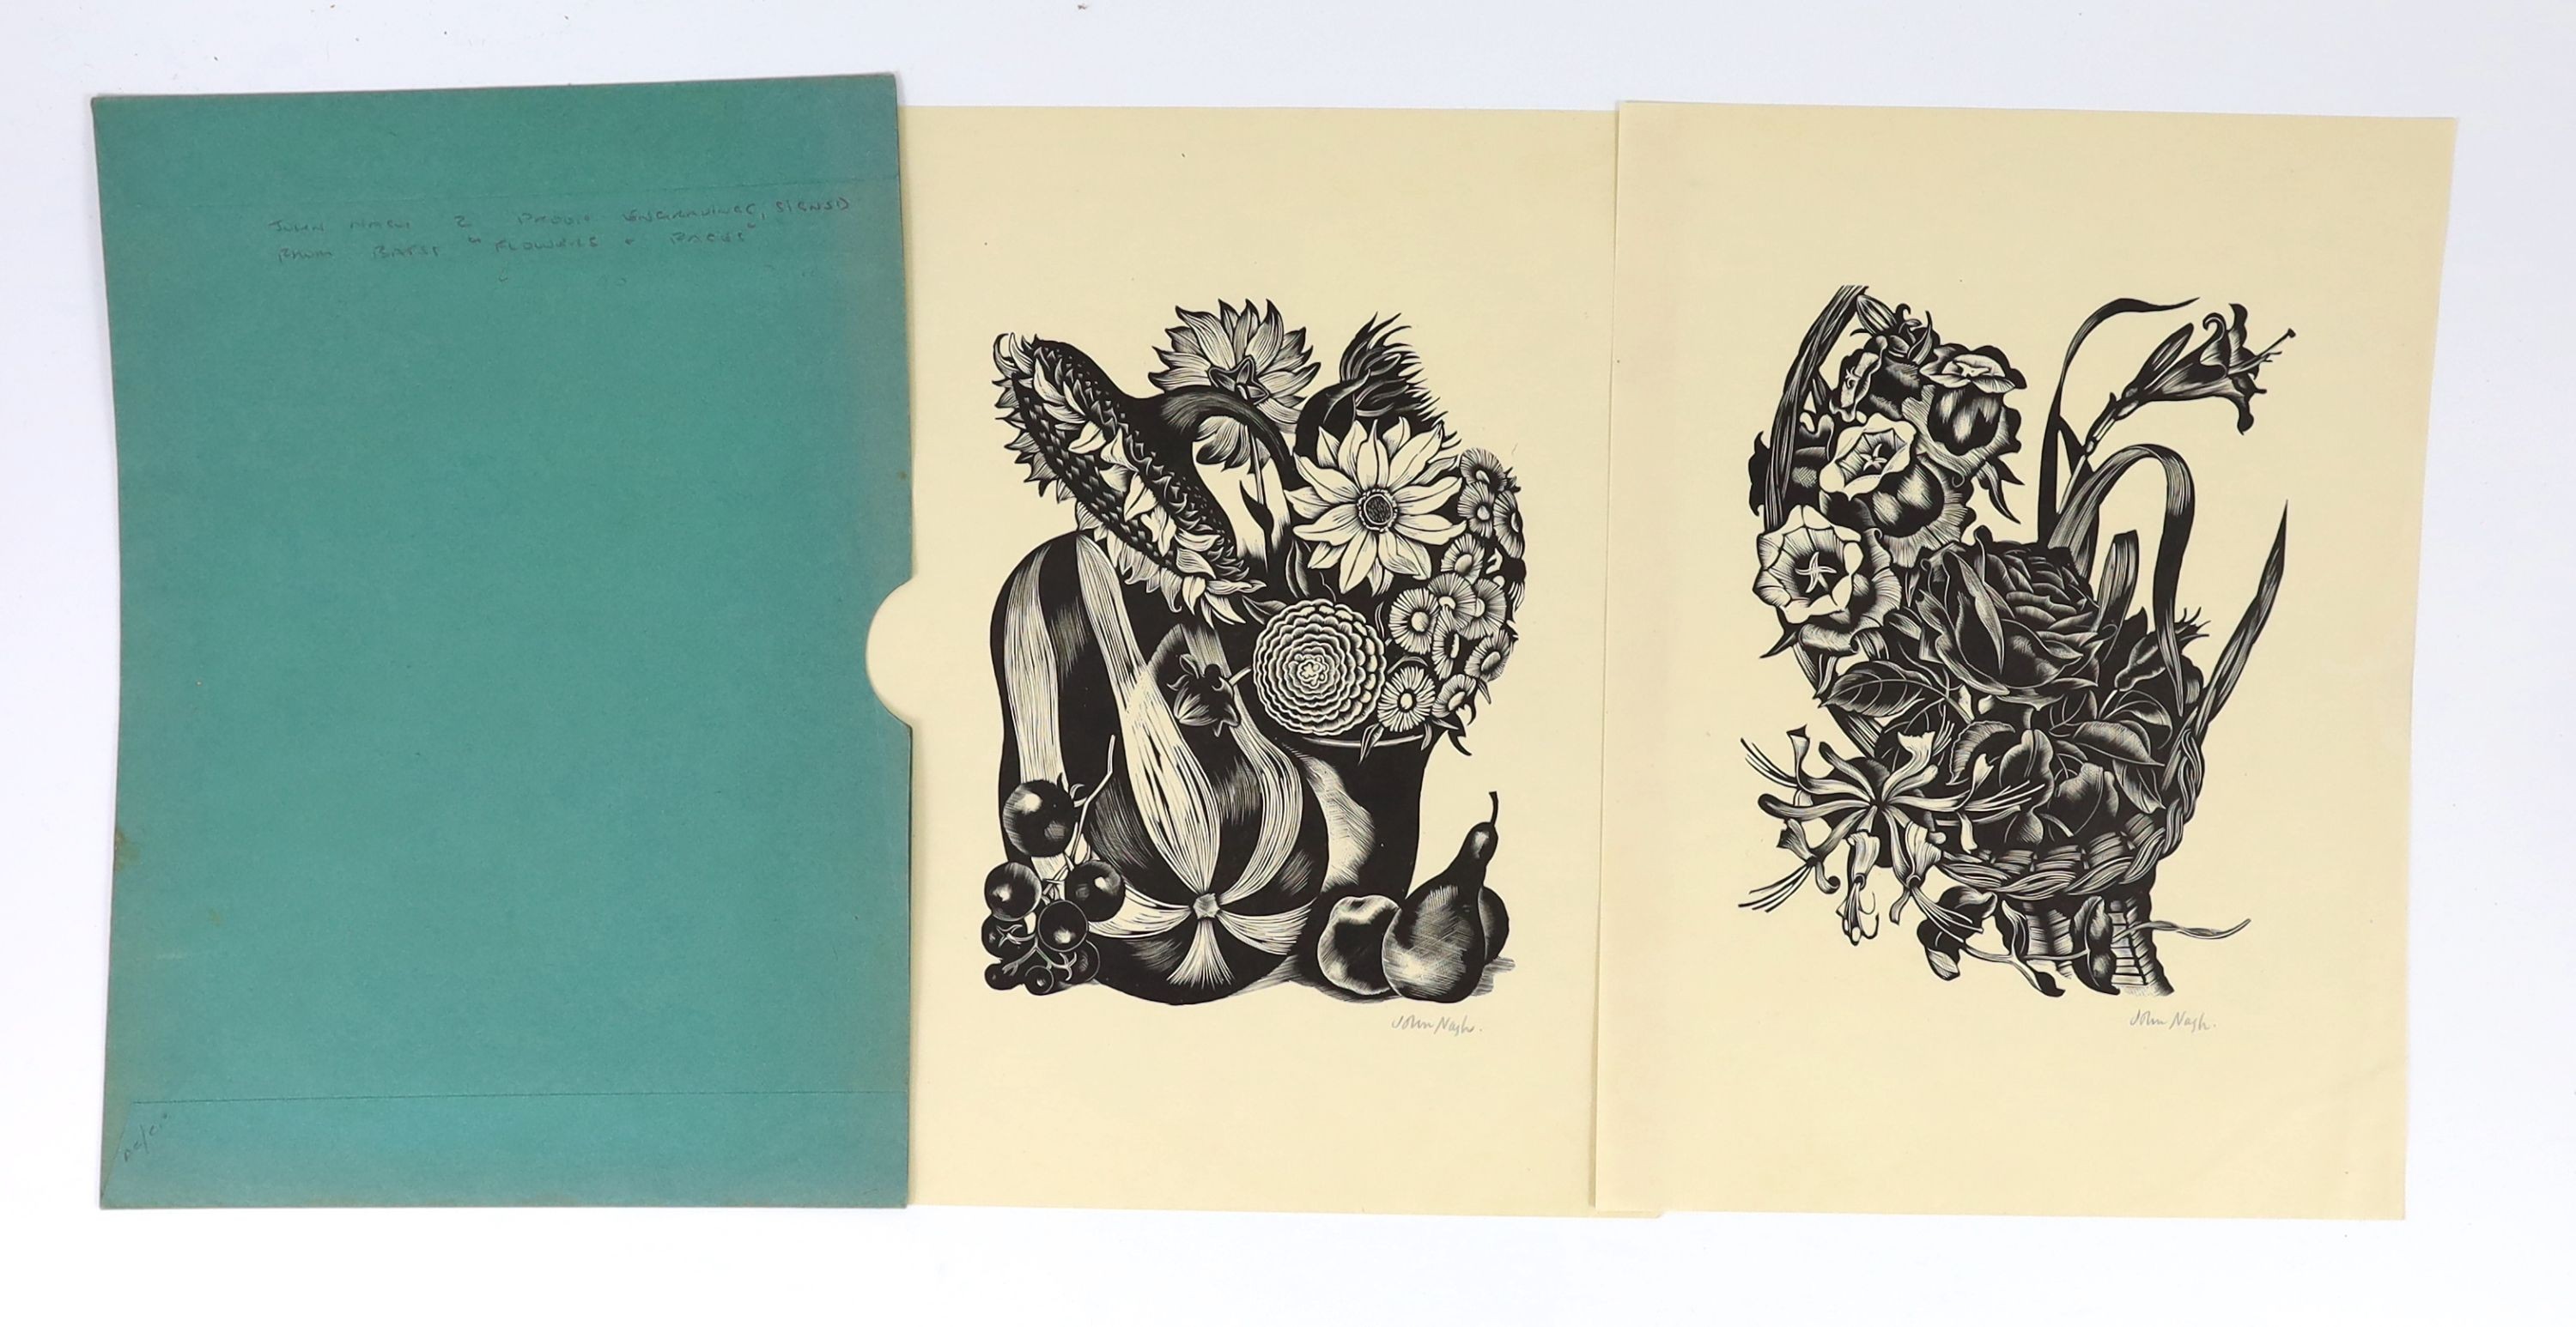 Golden Cockerel Press, John Nash - Flowers and faces. 1st and limited edition. 2 of the 4 additional suite of woodcut plates that accompanied the original publication by H. E. Bates. Comprising ‘Marrow and other Autumn F